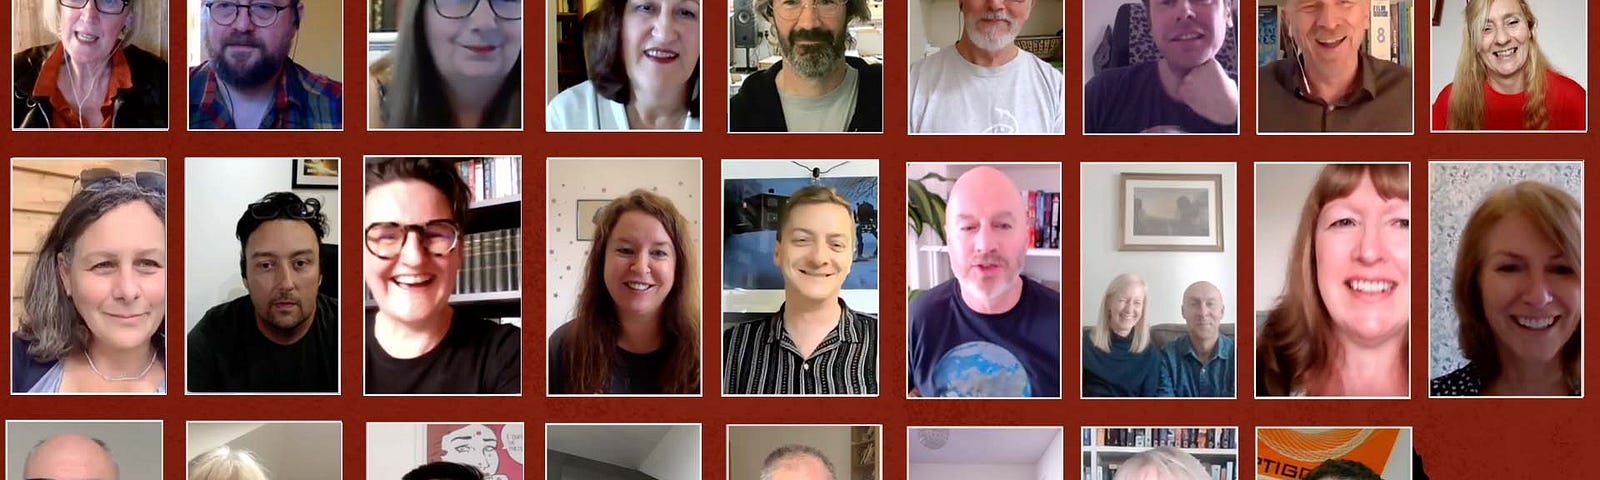 Compilation of 26 screengrabs of Scottish crime writers with Bloody Scotland red and black festival branding background in background, from an event at the 2020 edition of the Festival